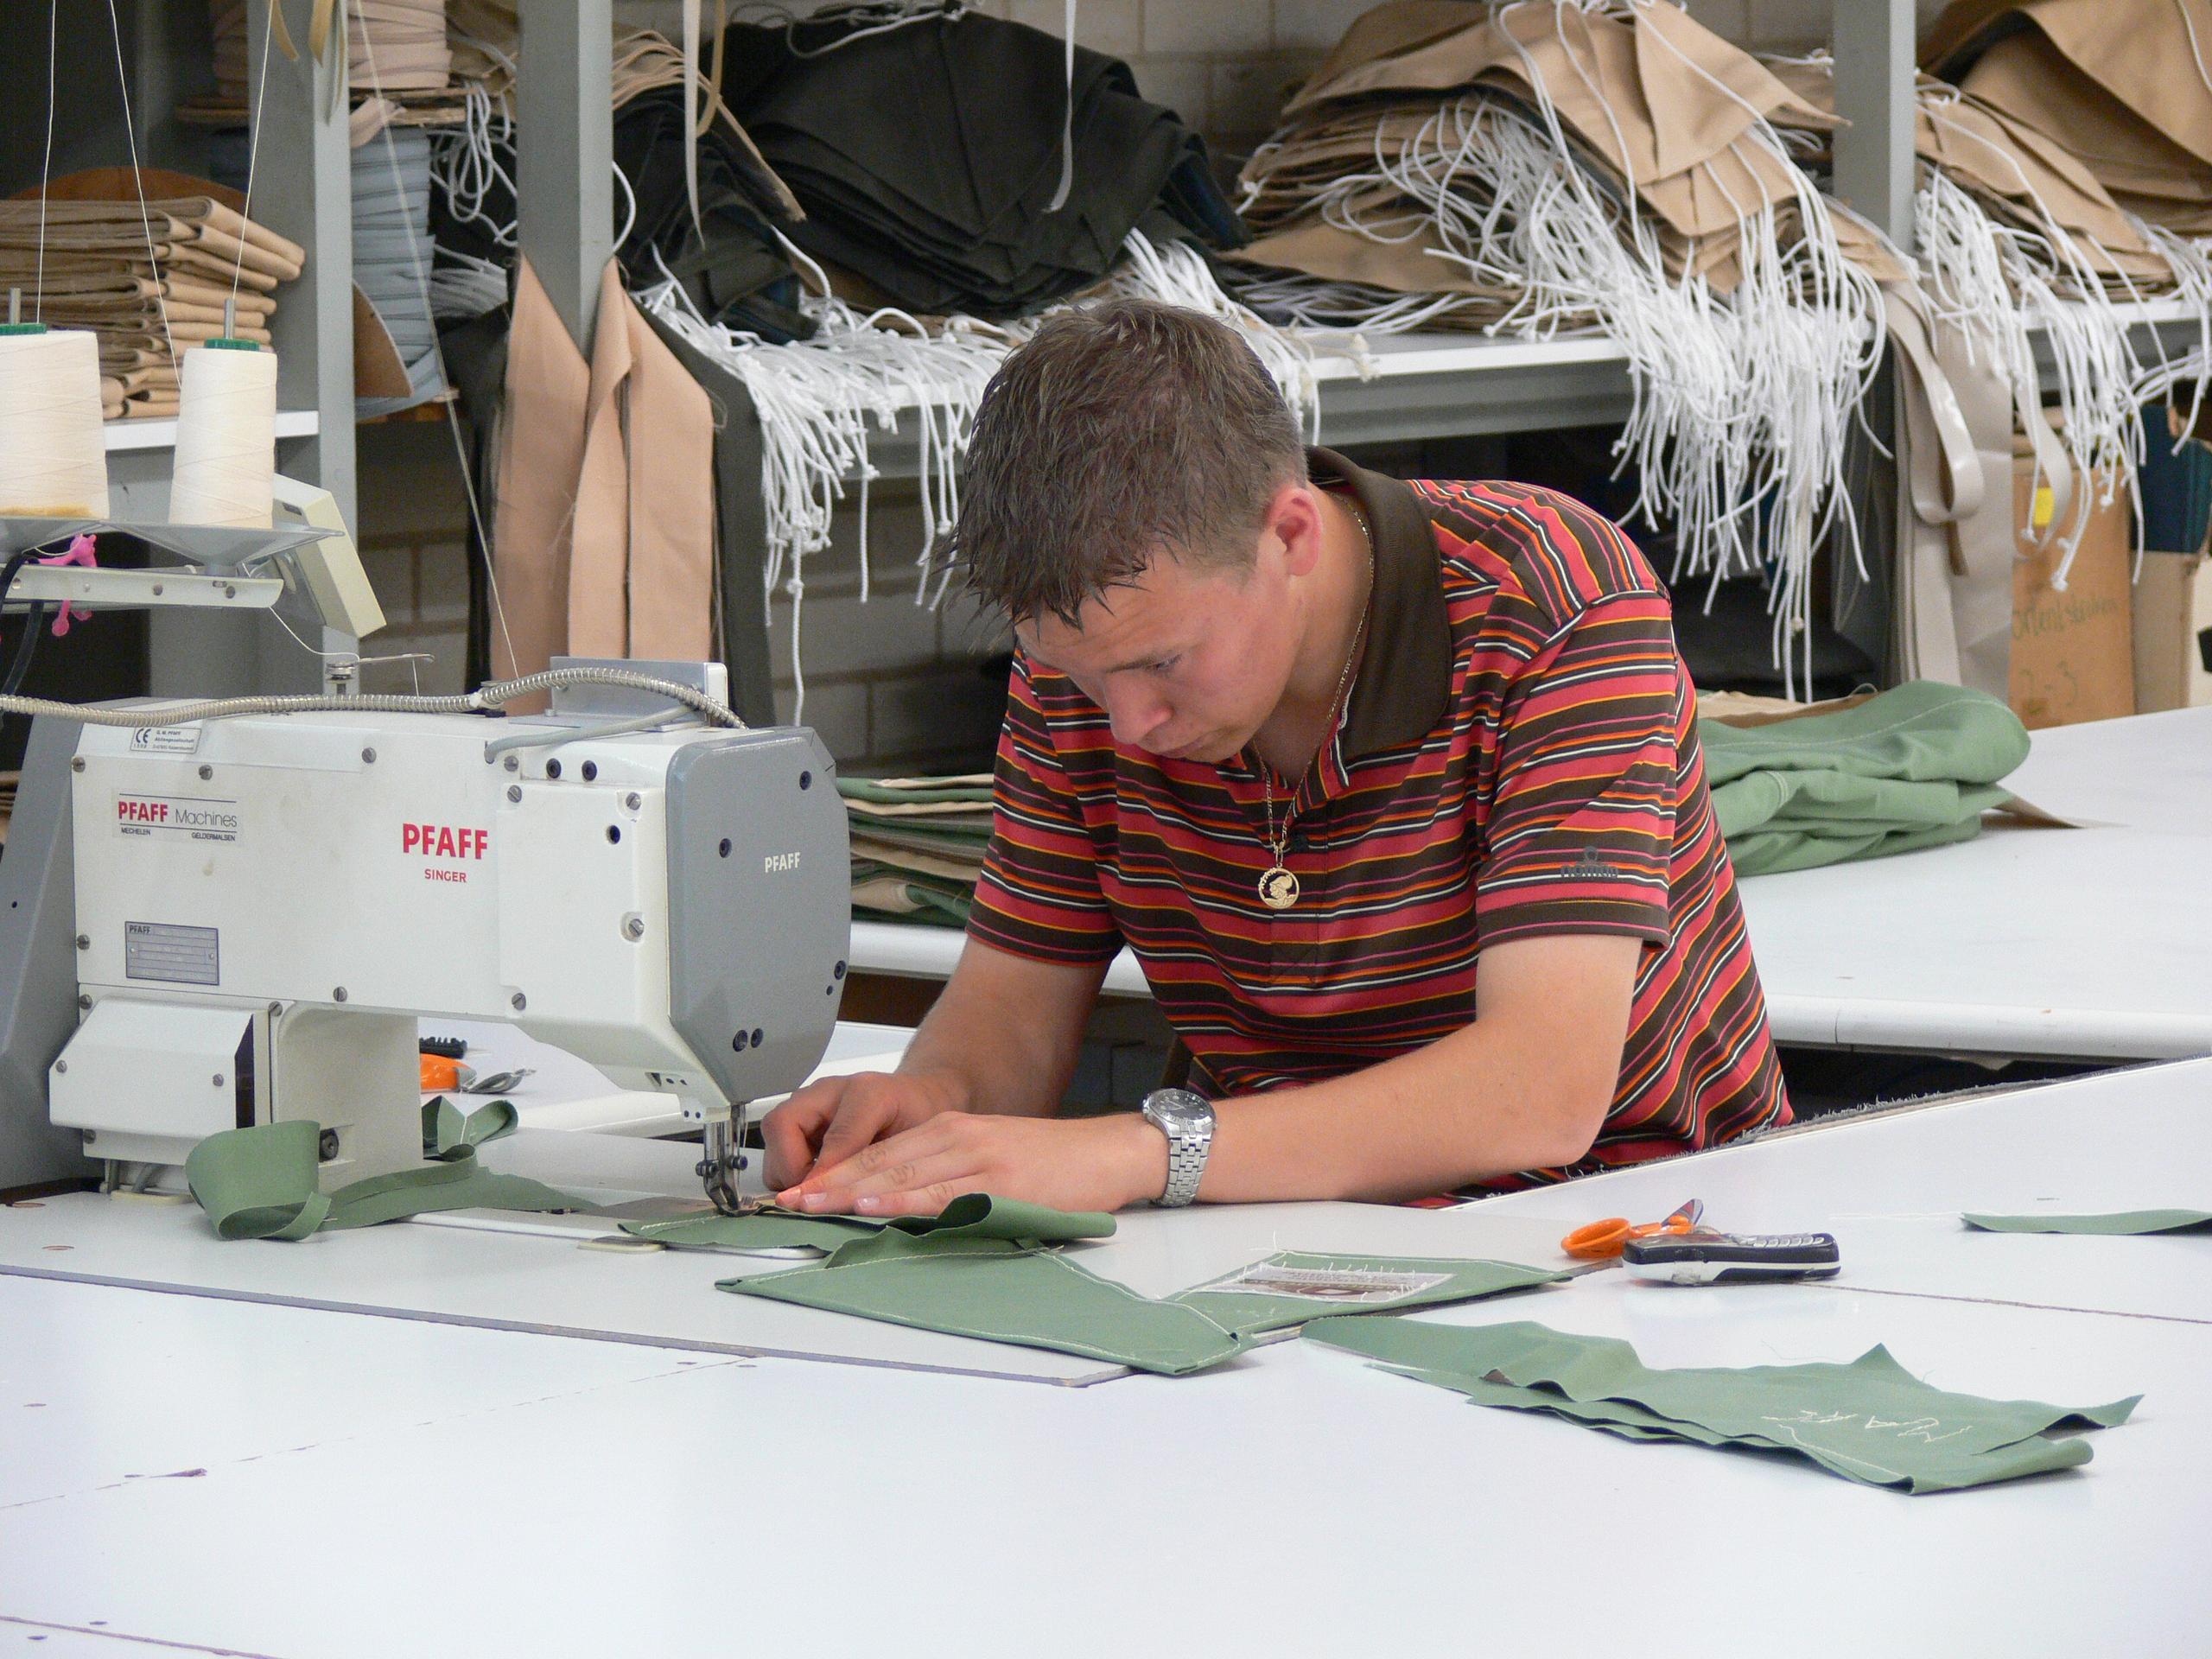 Person at modern day sewing machine making tents